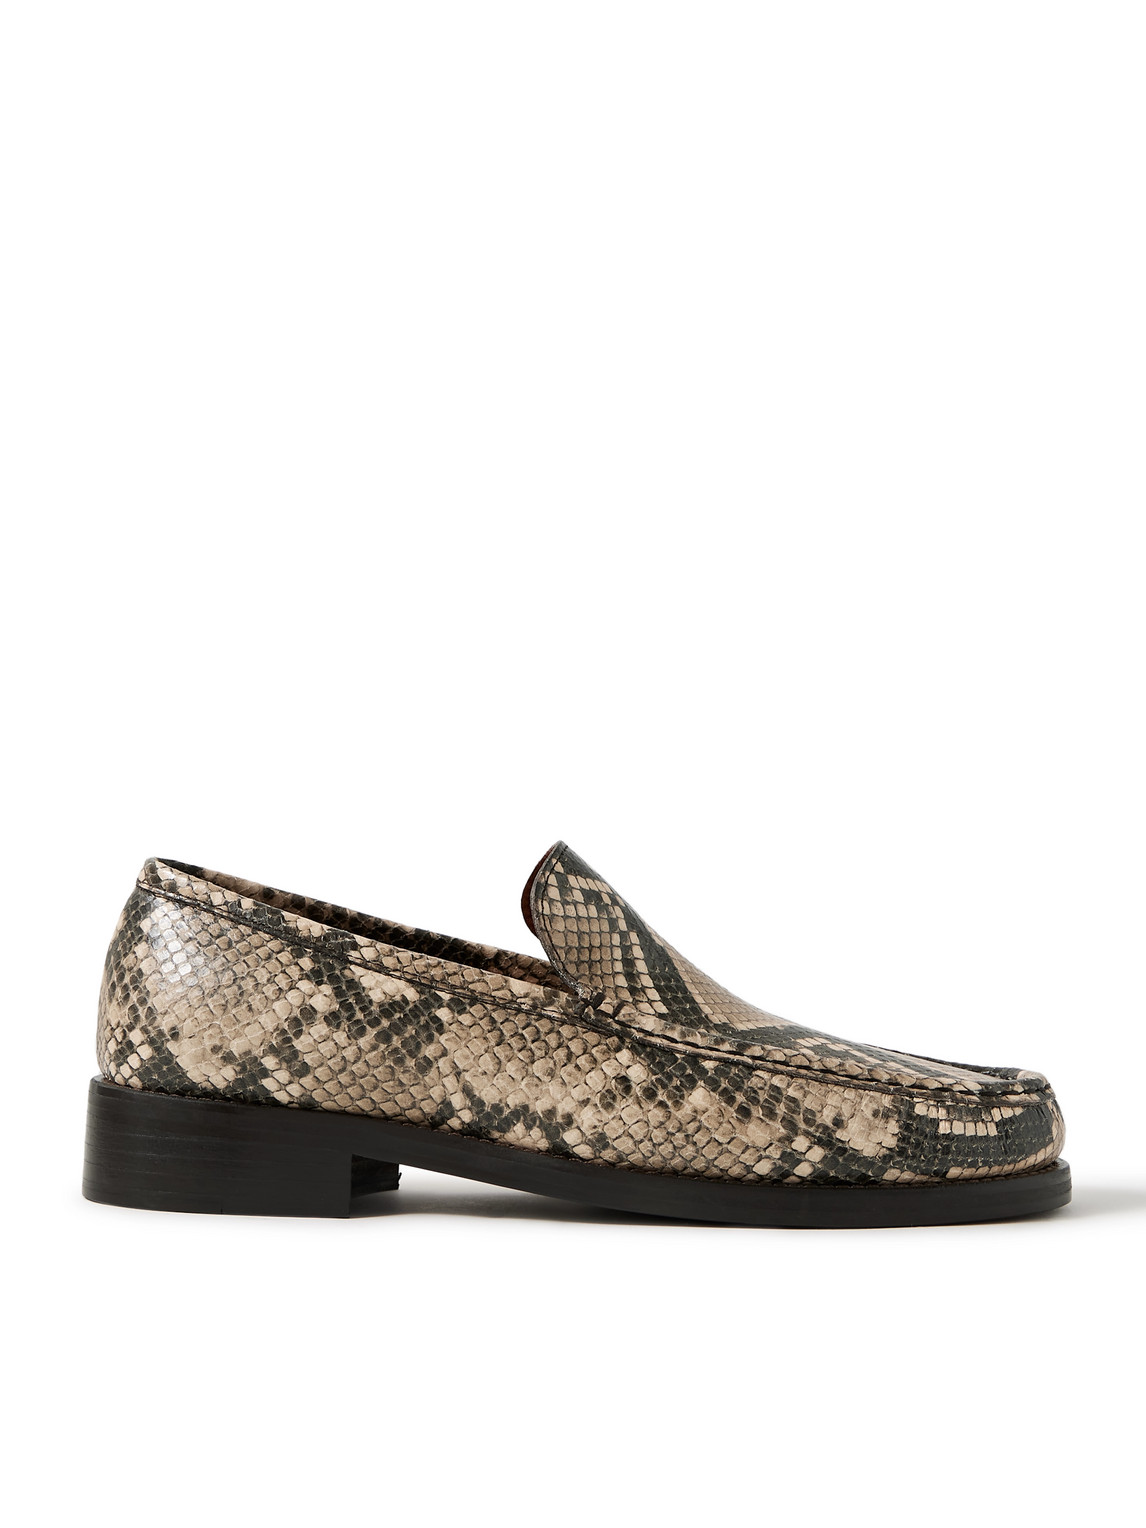 Acne Studios Boafer Snake-effect Leather Loafers In Aek Beige